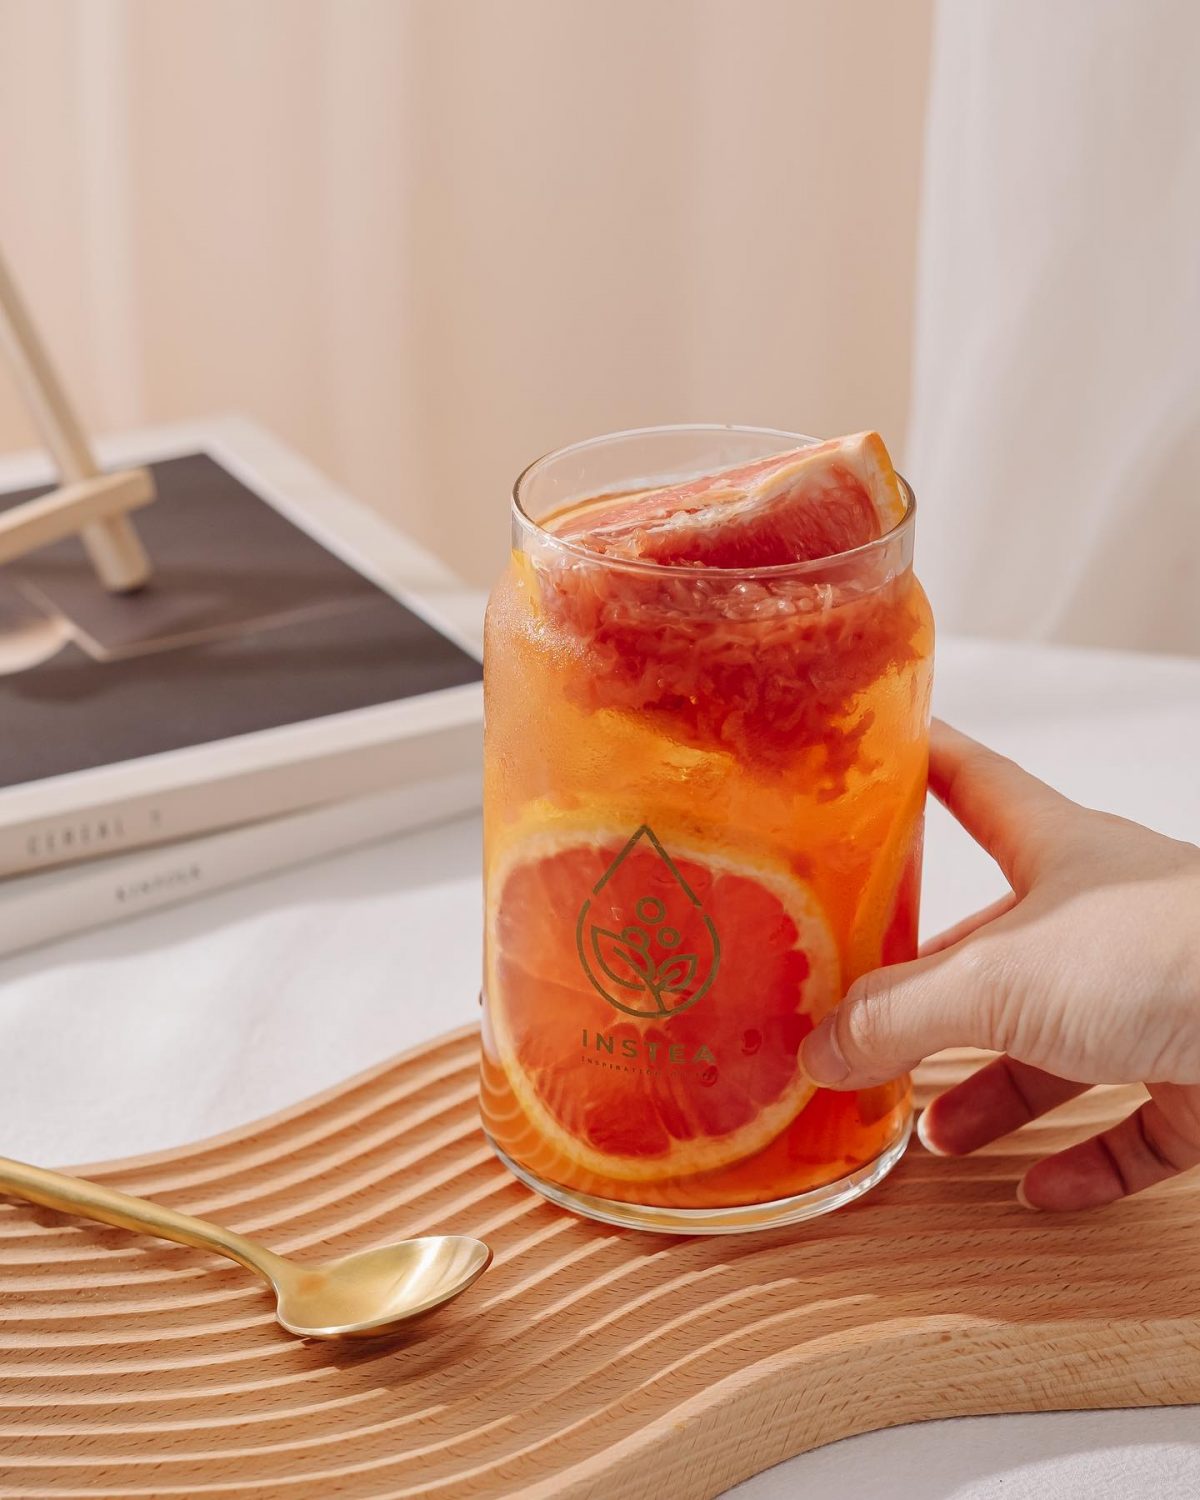 Both refreshing and chilling, the Summer Supreme Grapefruit Tea will surely leave you satisfied!